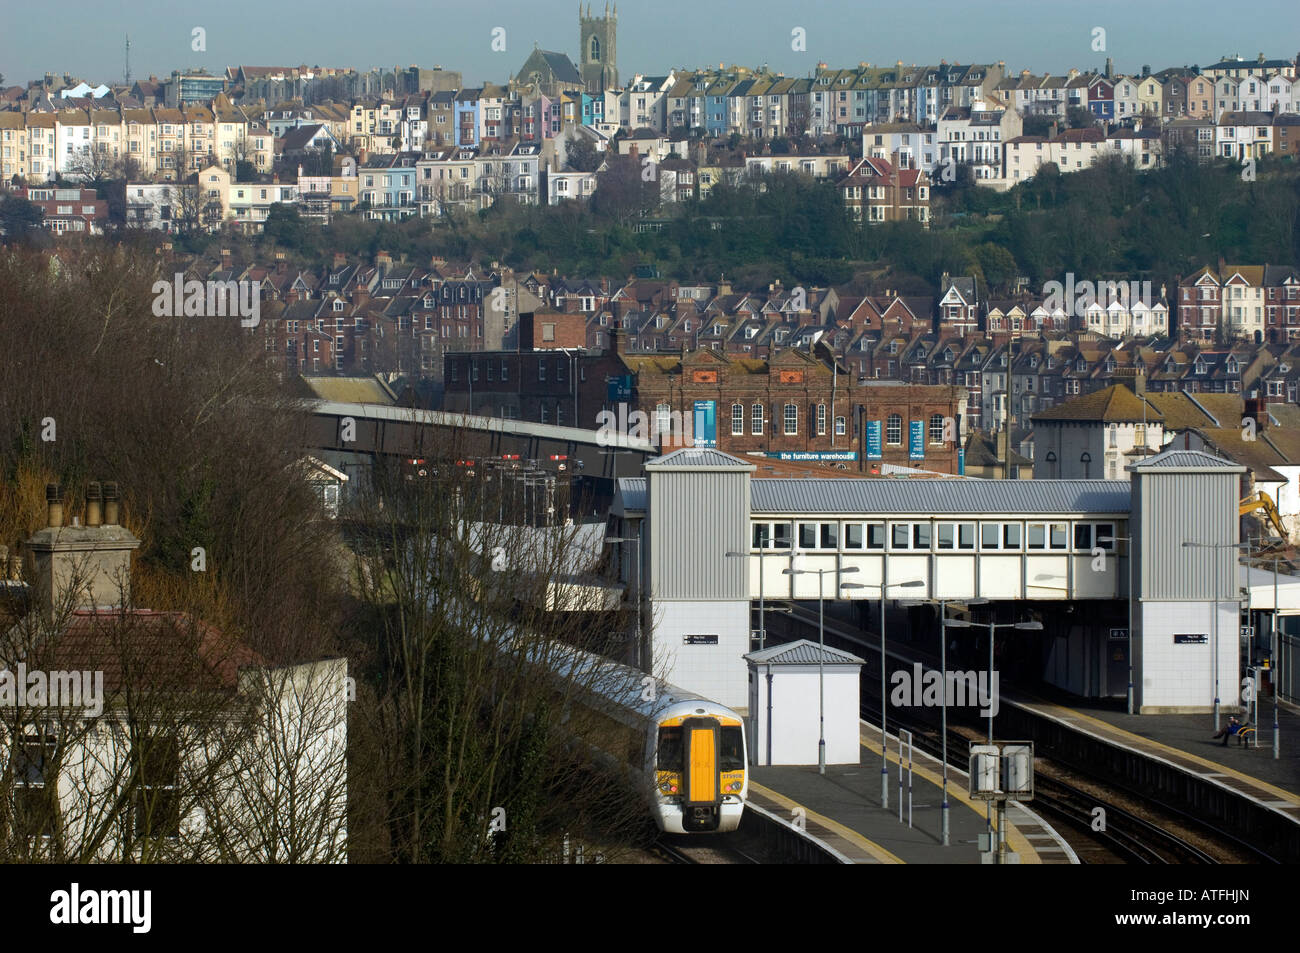 Hastings town railway station in Sussex with a view over Hastings and St Leonards in the background Stock Photo